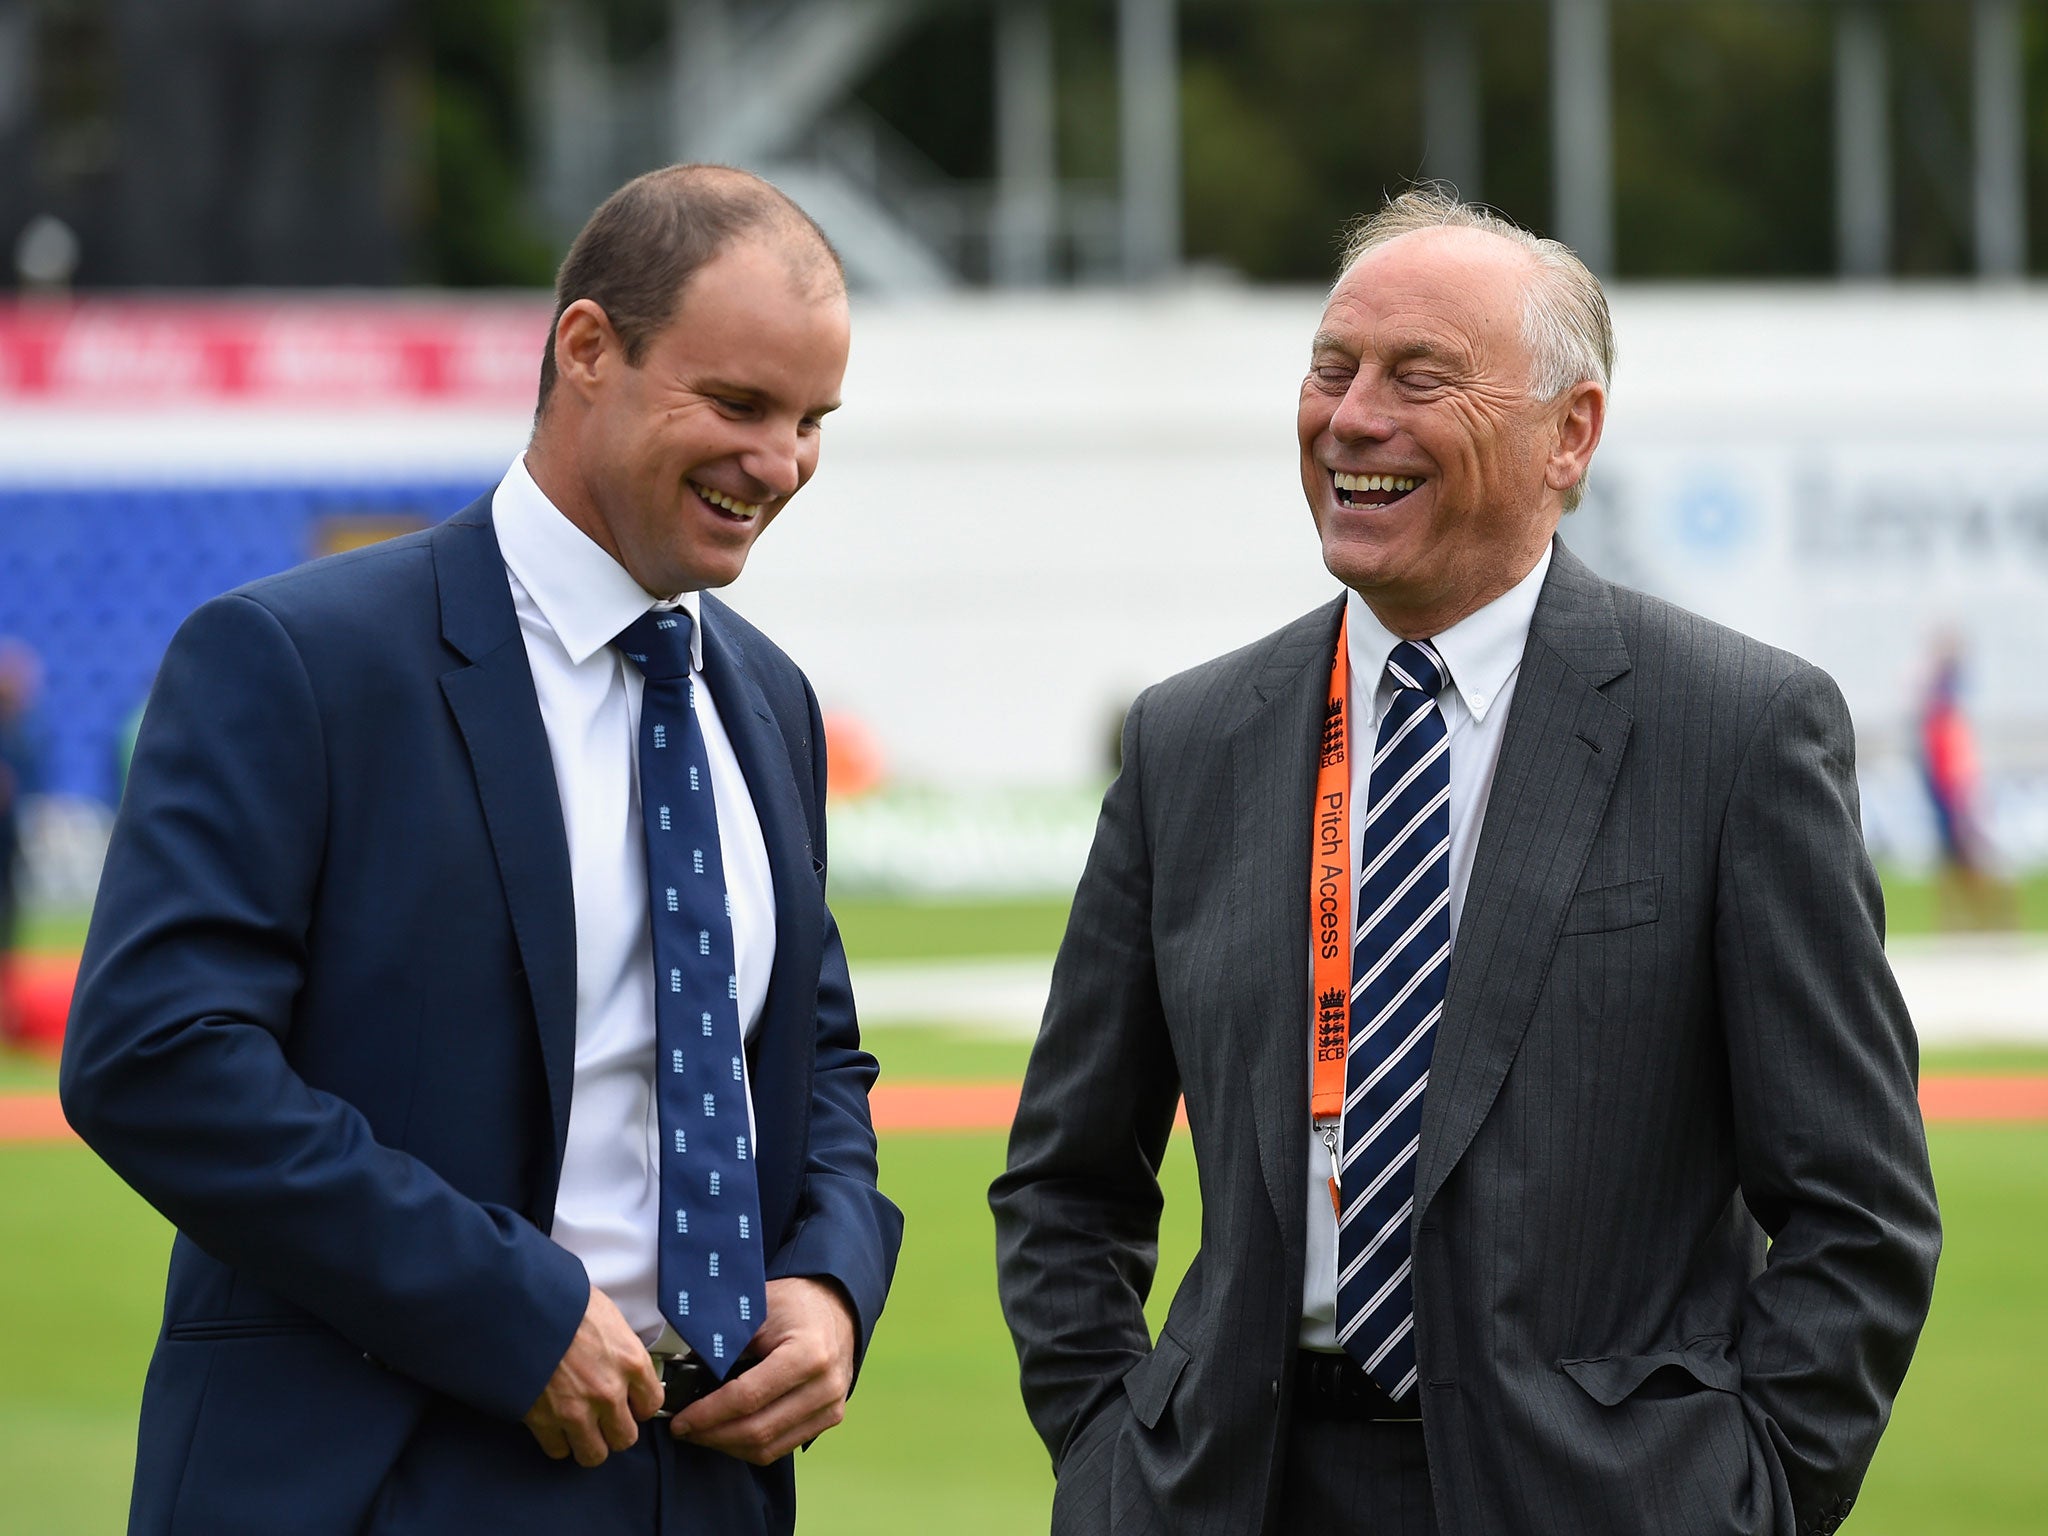 ECB chairman Colin Graves with Andrew Strauss, director of England cricket